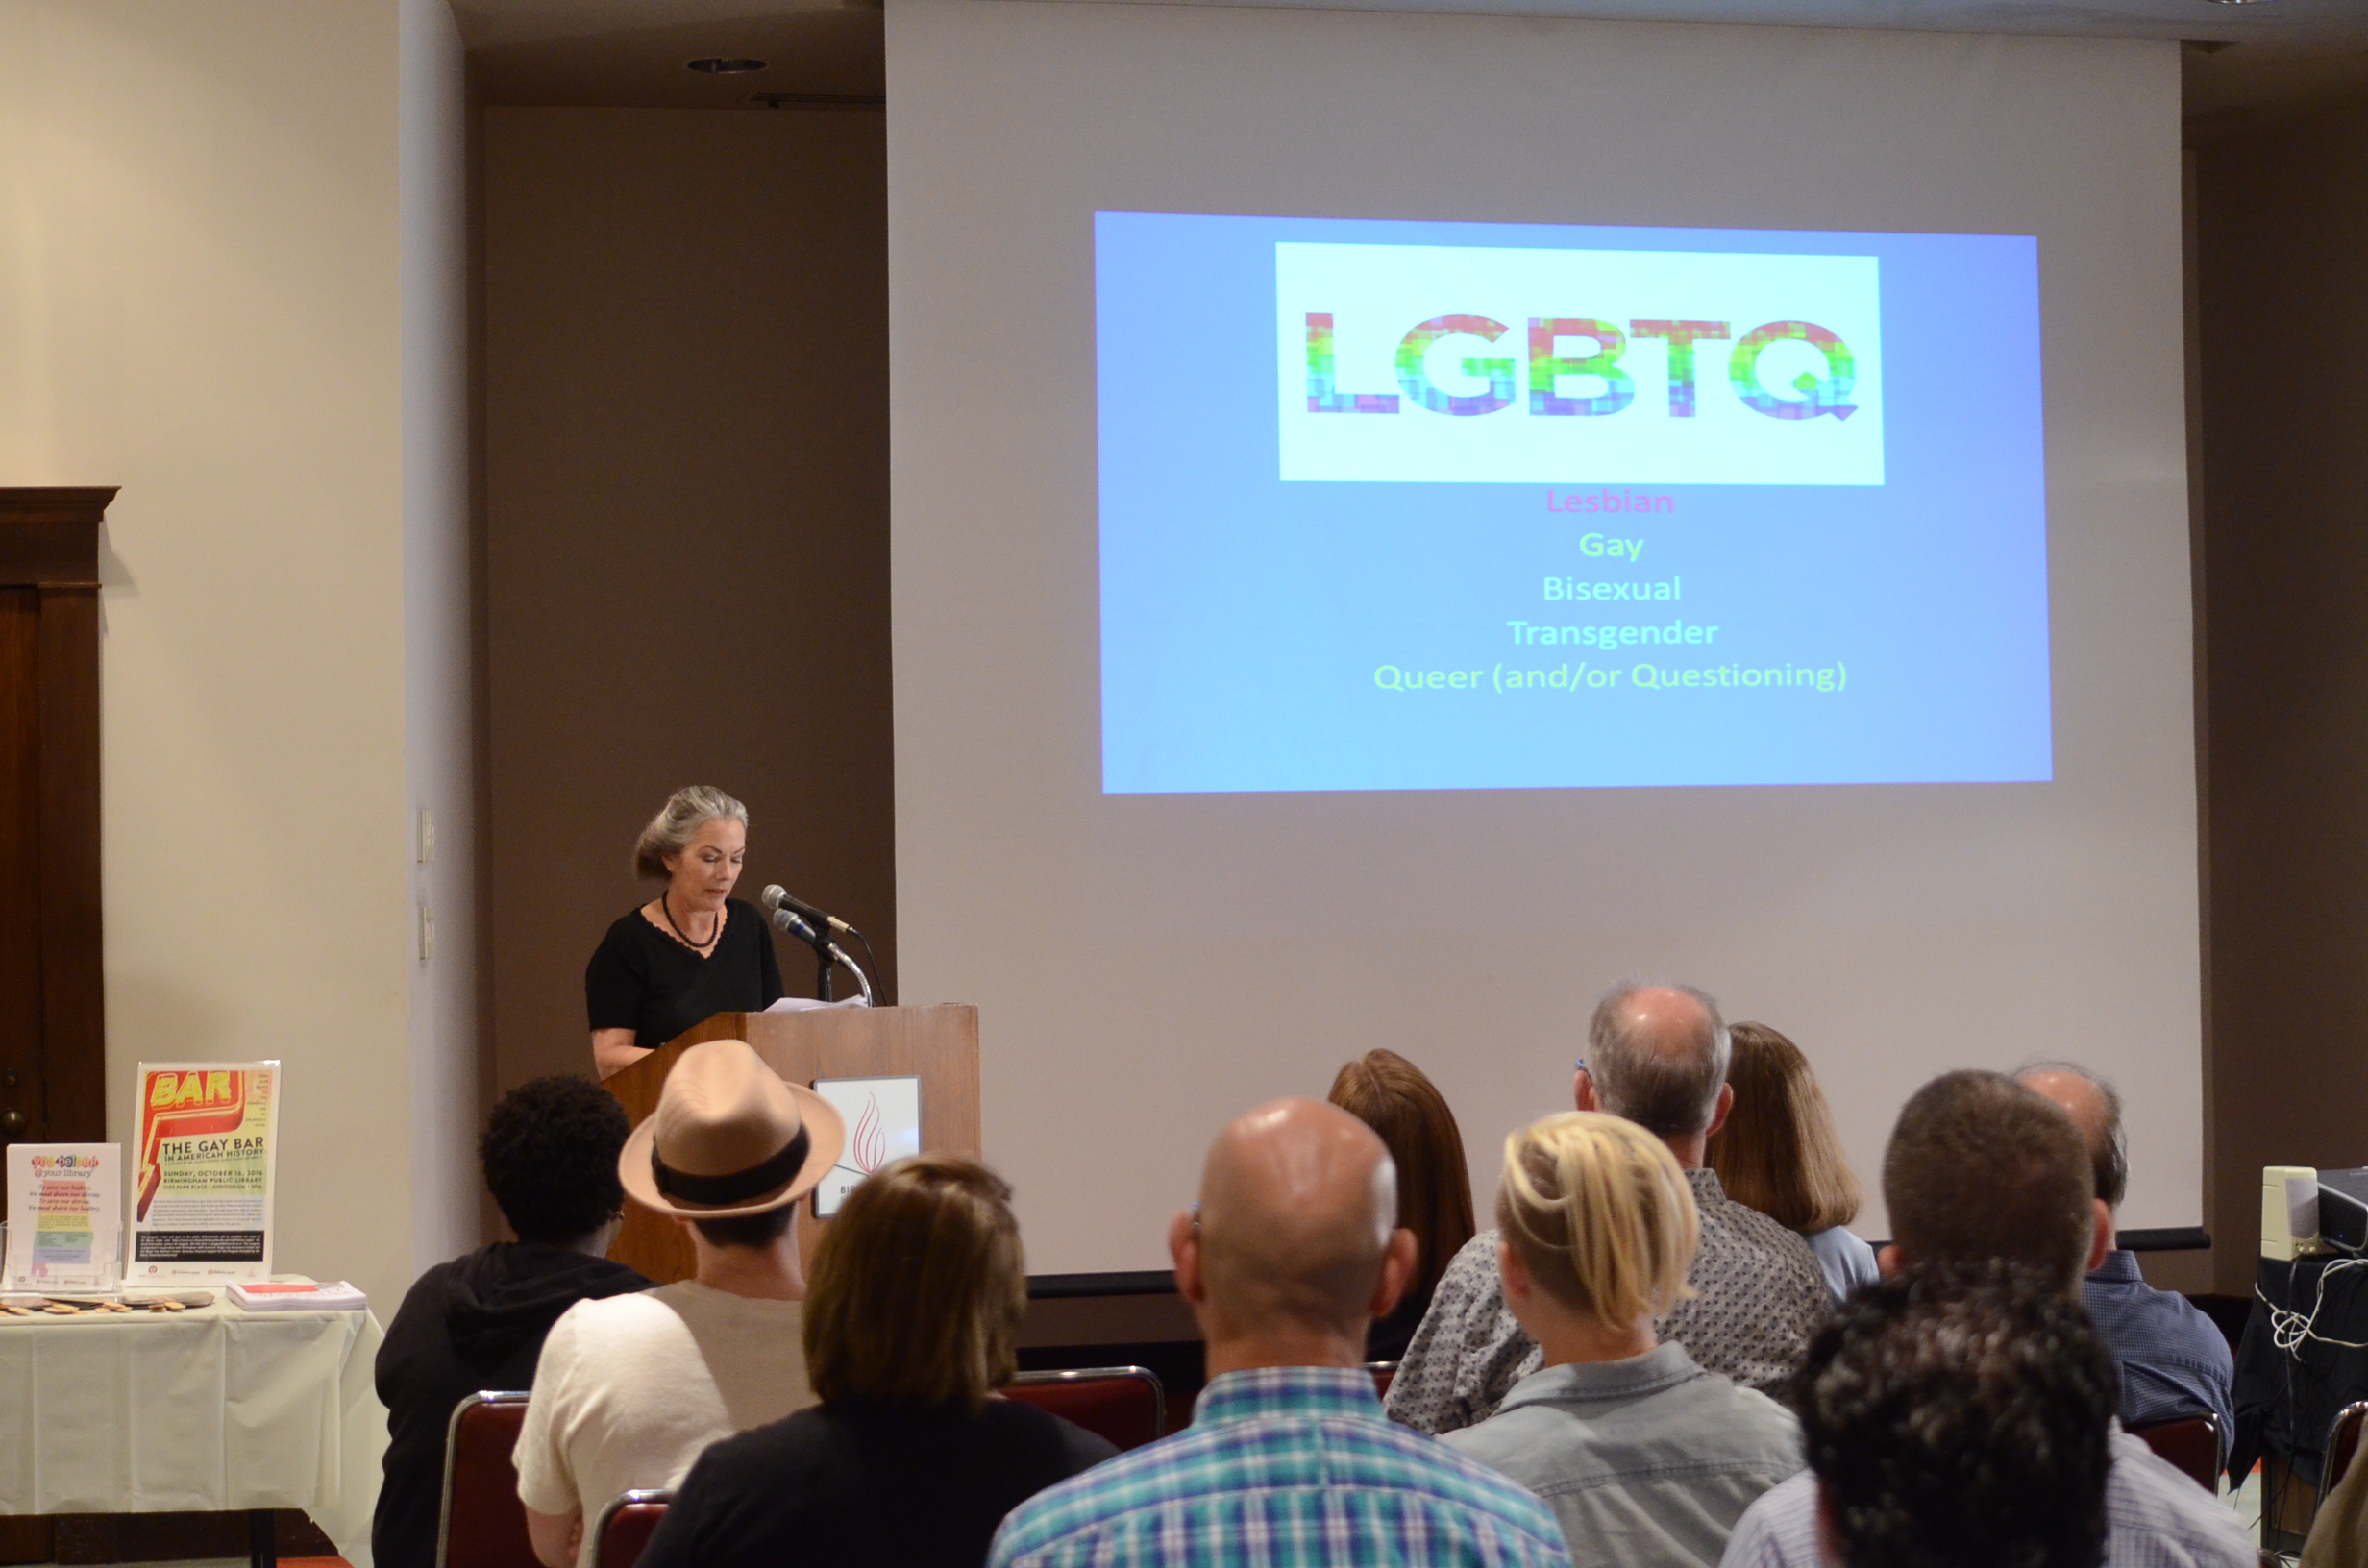  Caption: Nancy Unger speaks to a crowd at the Birmingham Public Library about LGBTQ roles in history. Photo by Ian Keel